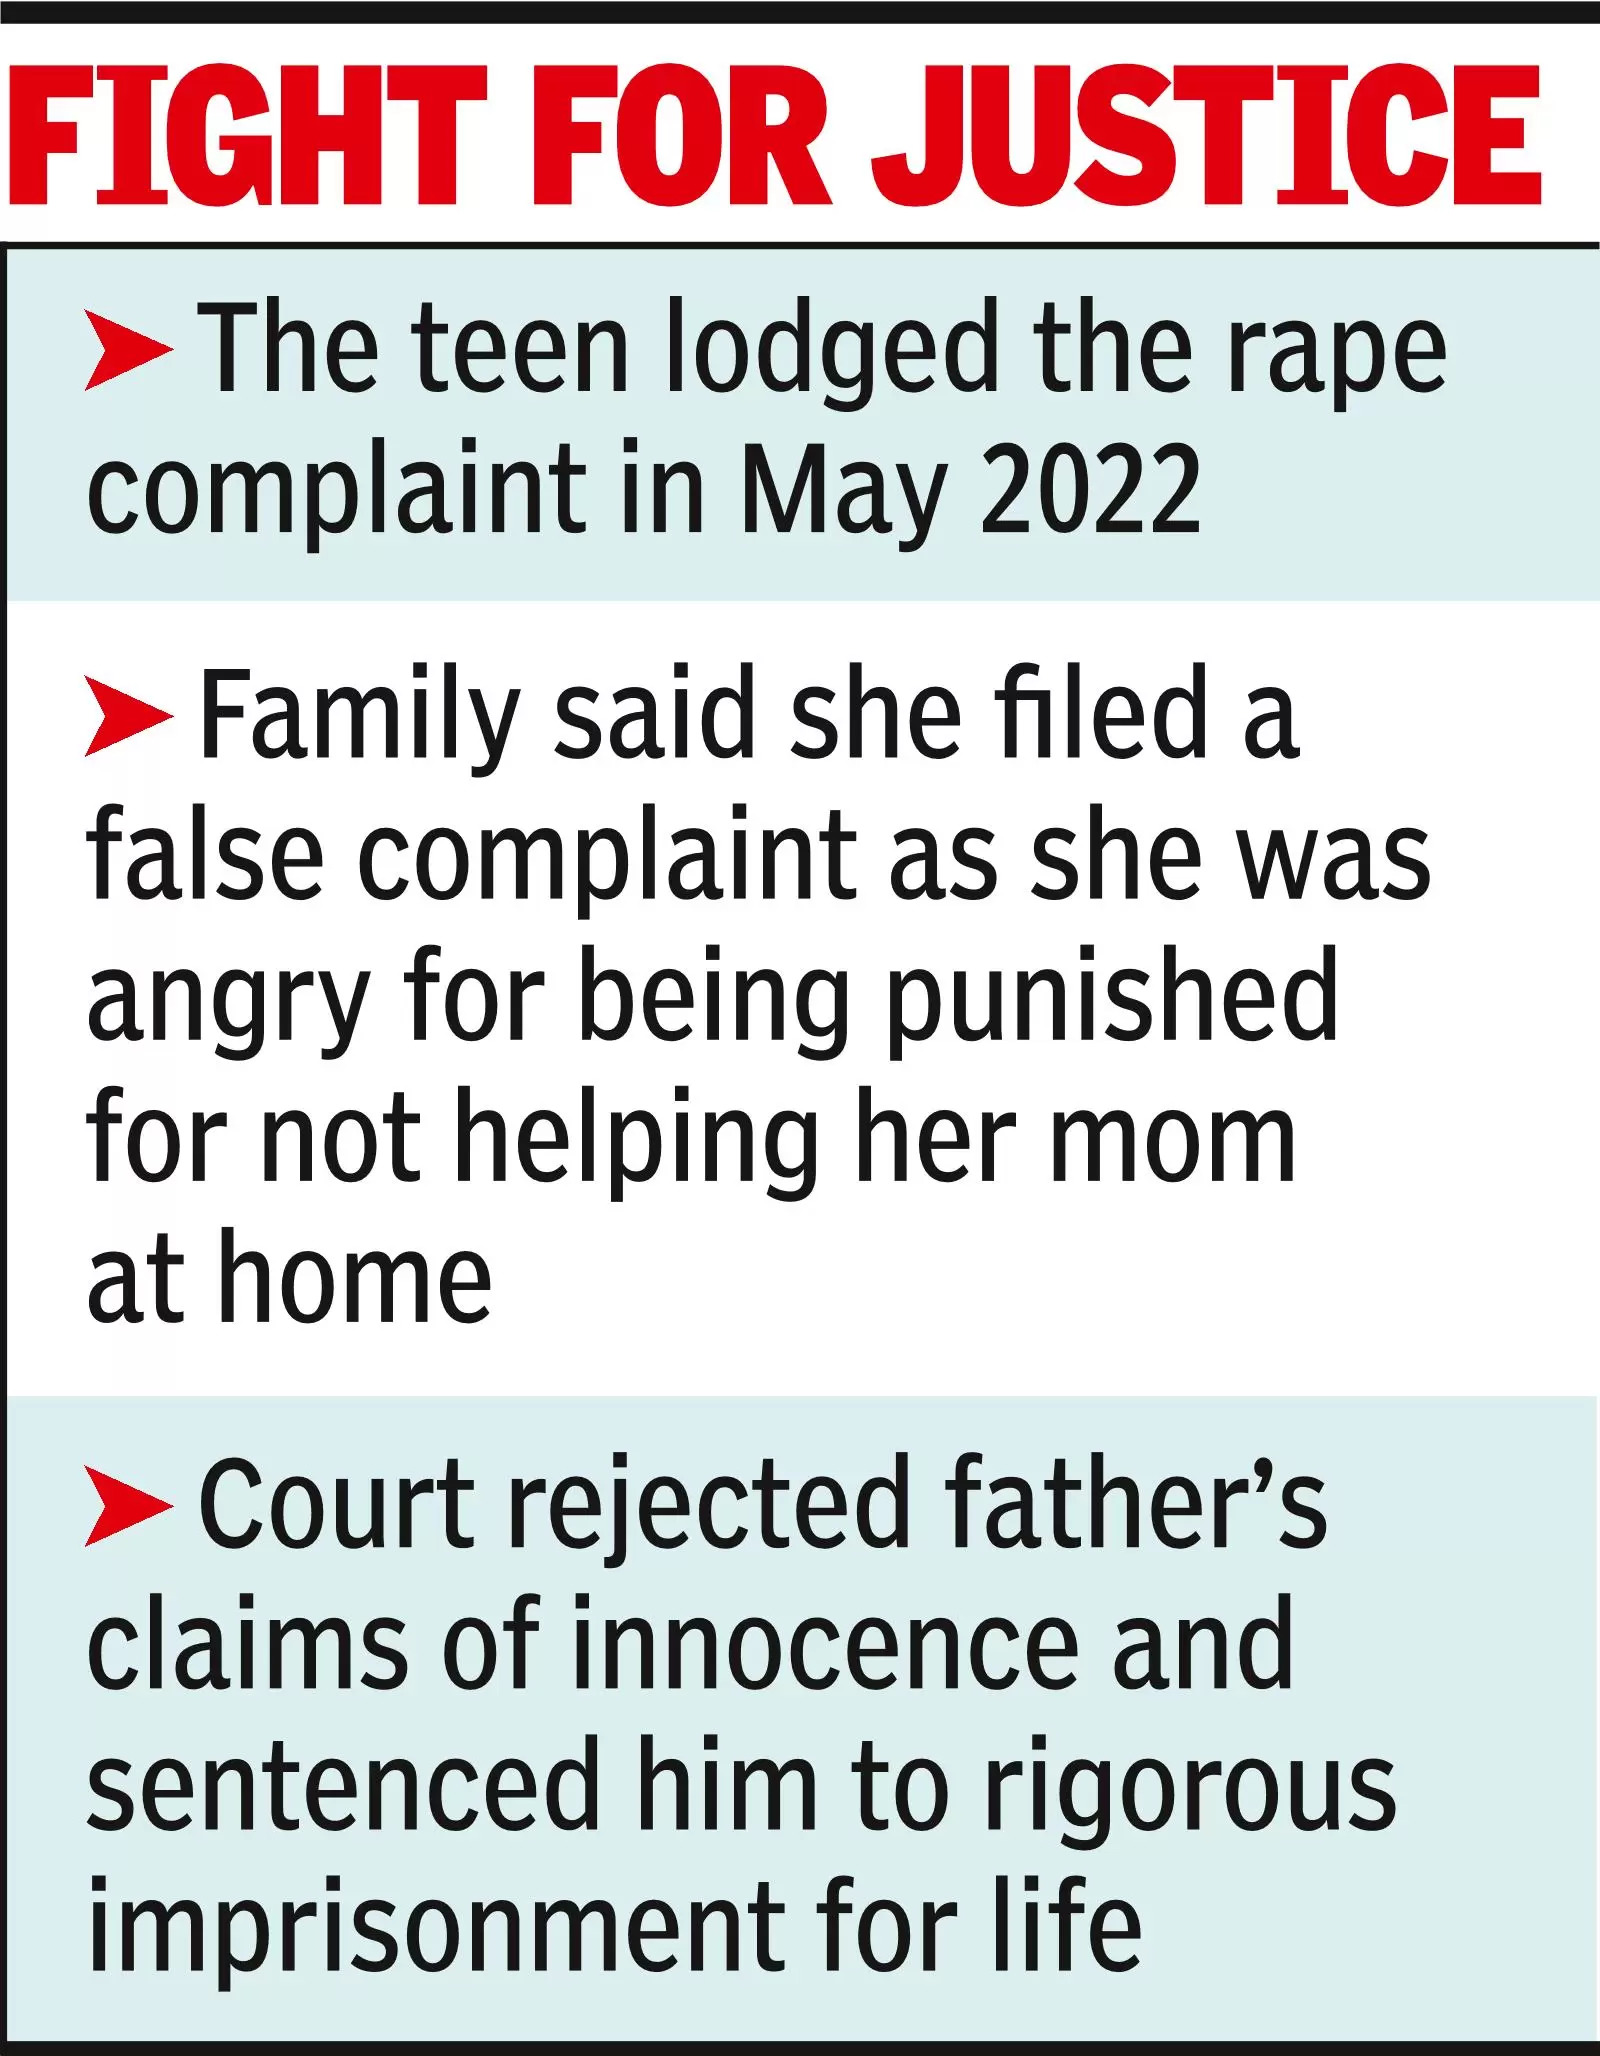 Shunned by own family, 15-yr-old fights alone to send dad to jail for rape